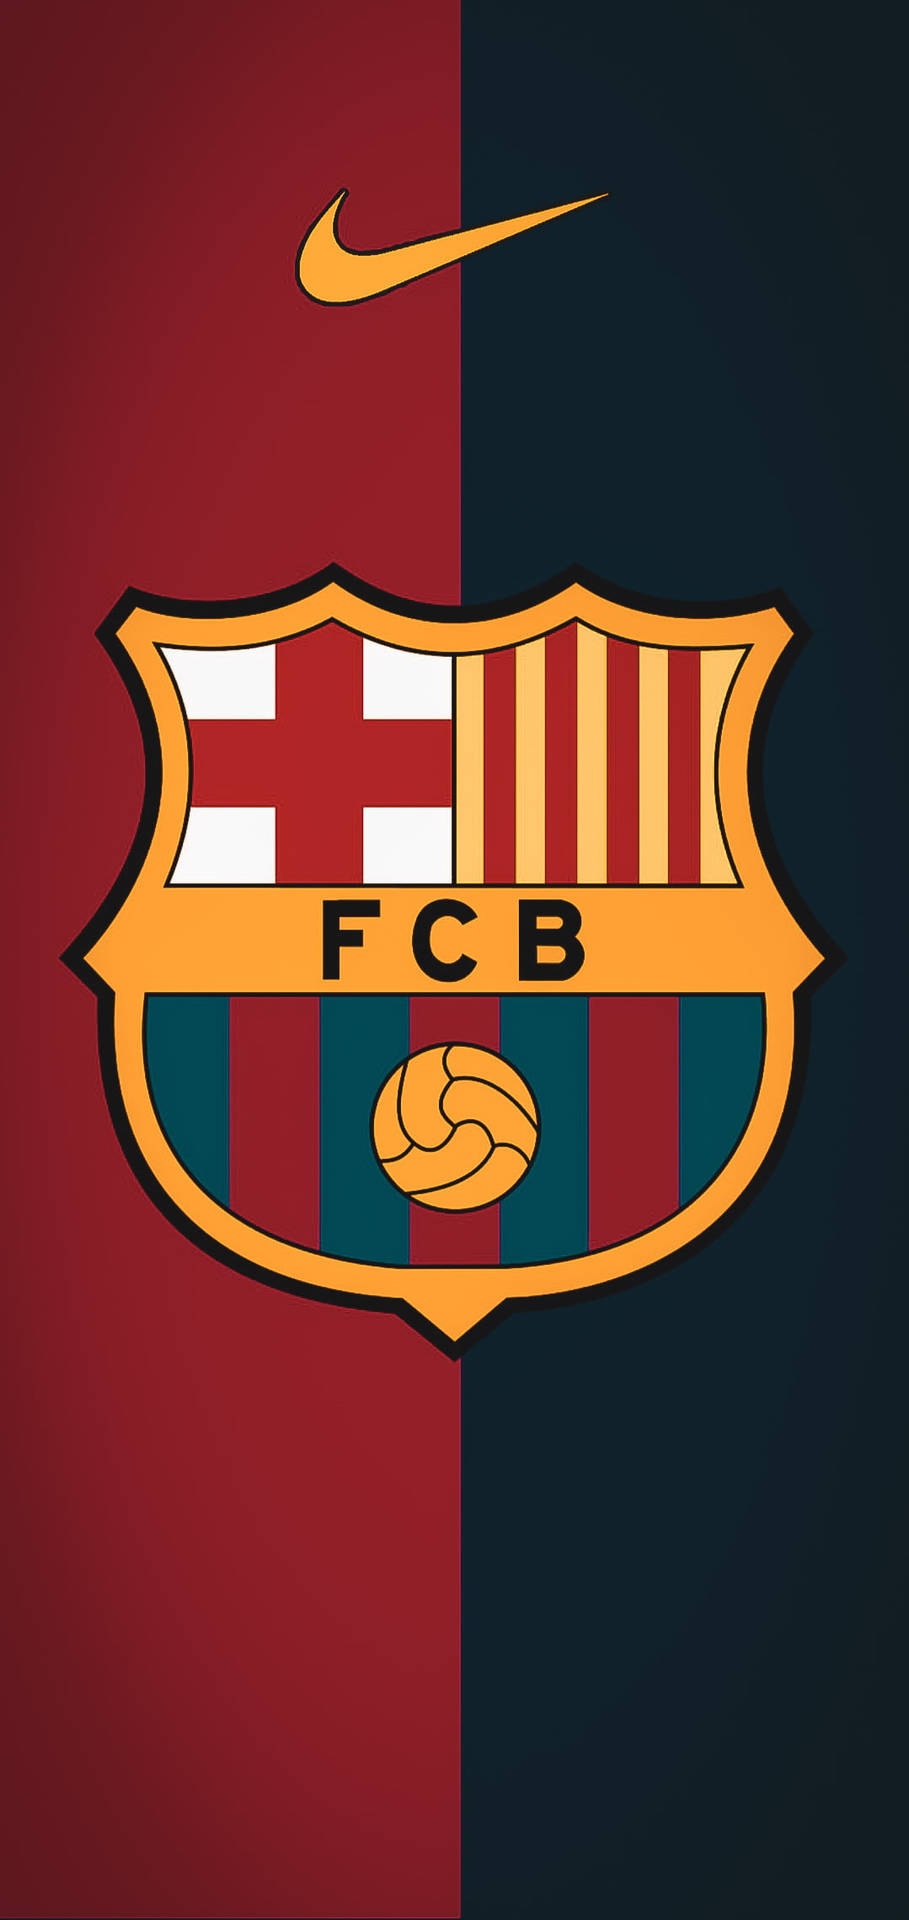 Barcelona Fc And Nike Logos Background